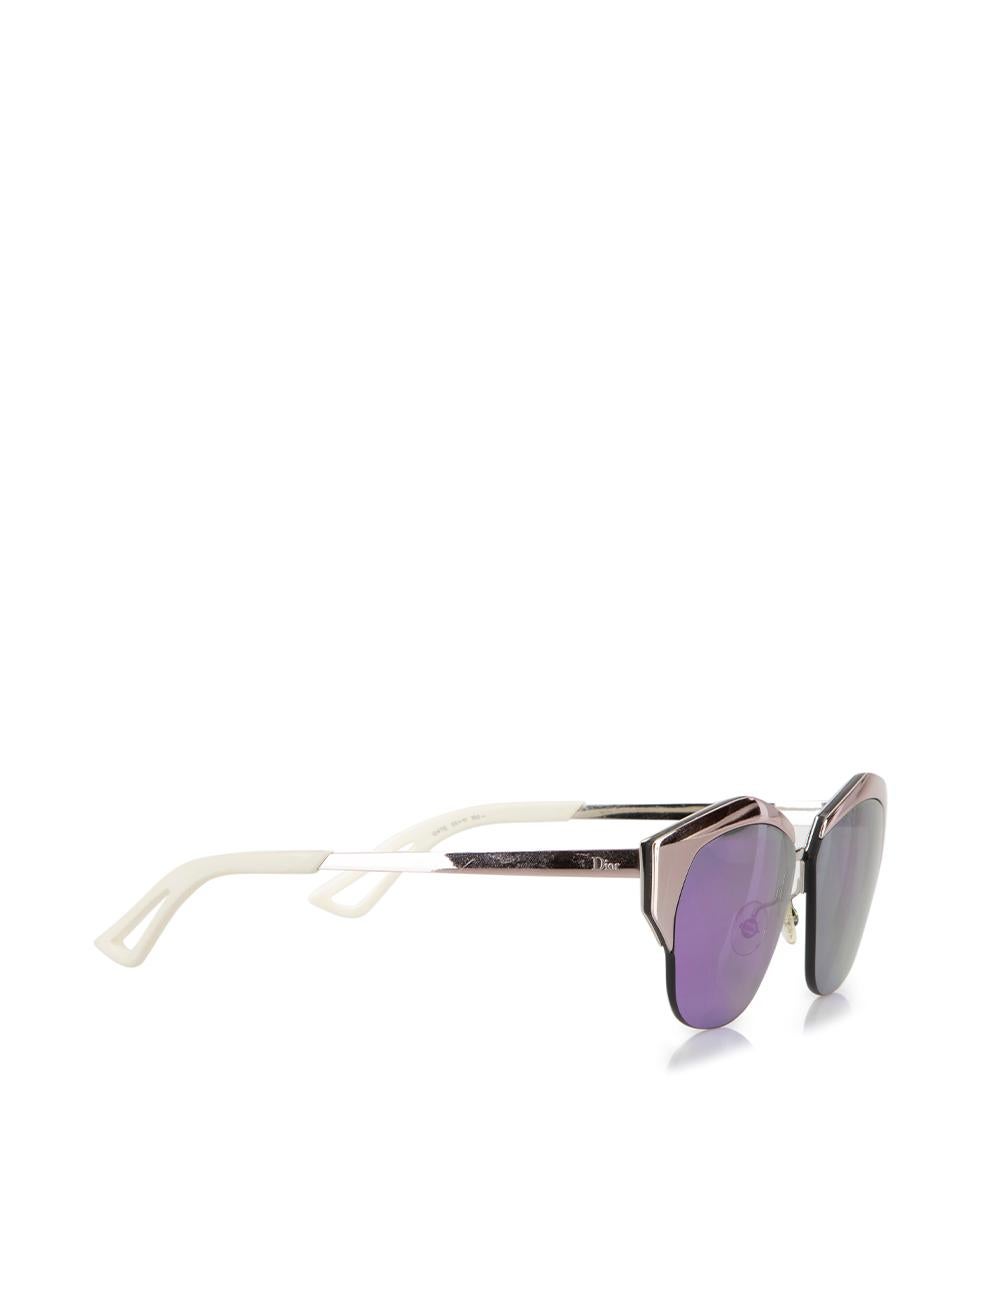 CONDITION is Very good. Minimal wear to sunglasses is evident. Minimal wear to the arms which are a little scuffed and the frame around the lens on this used Dior designer resale item. This item includes the original case which is visibly peeling